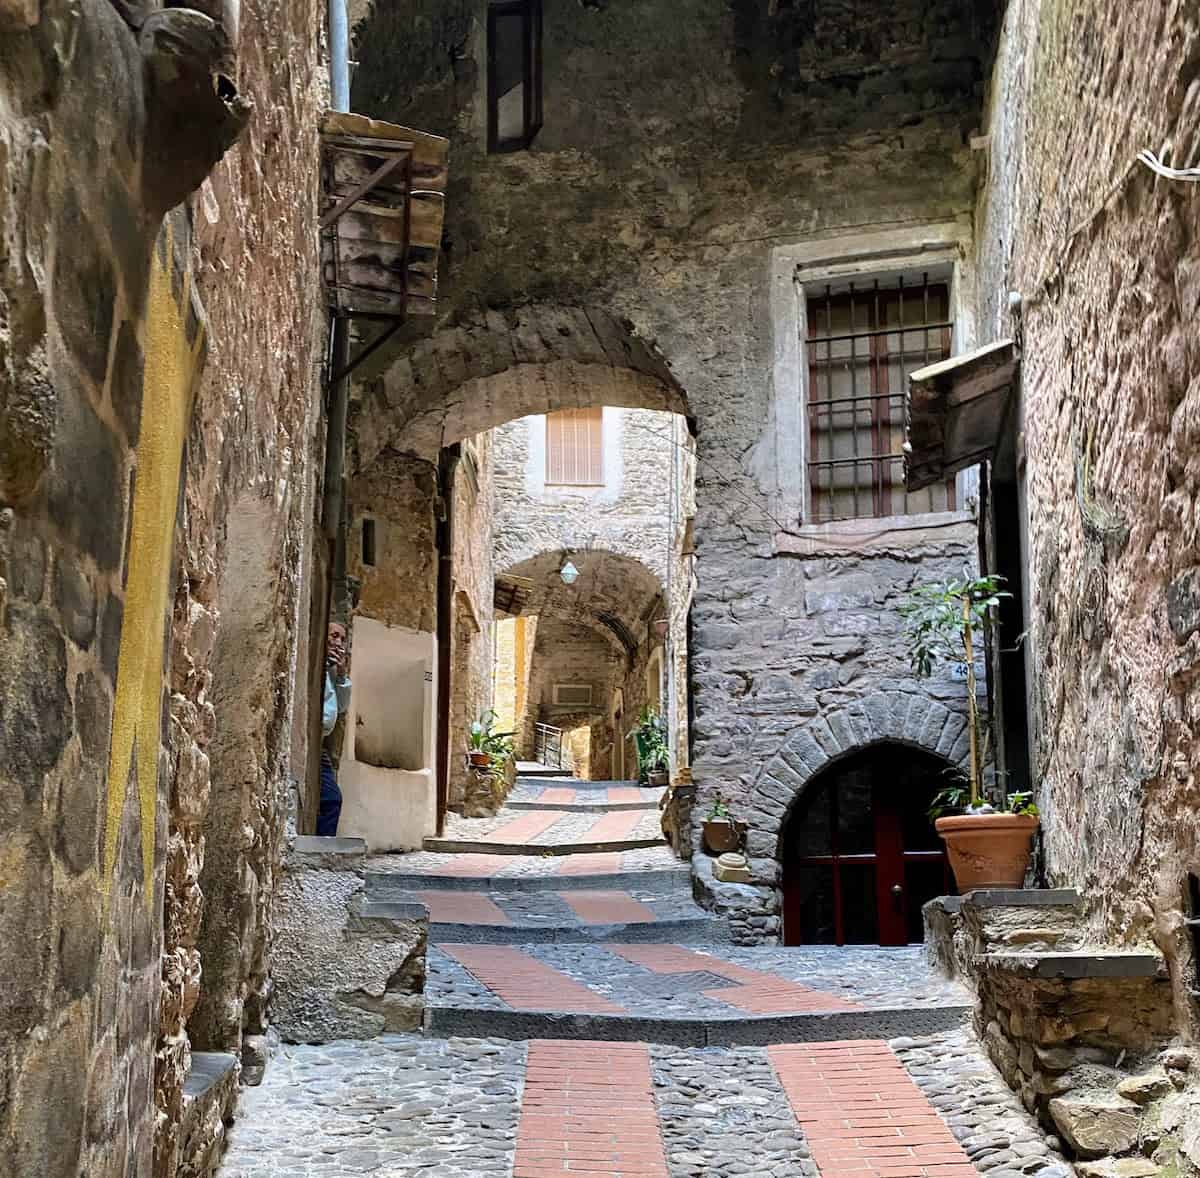 Narrow alleys in the historic center of Dolceacqua